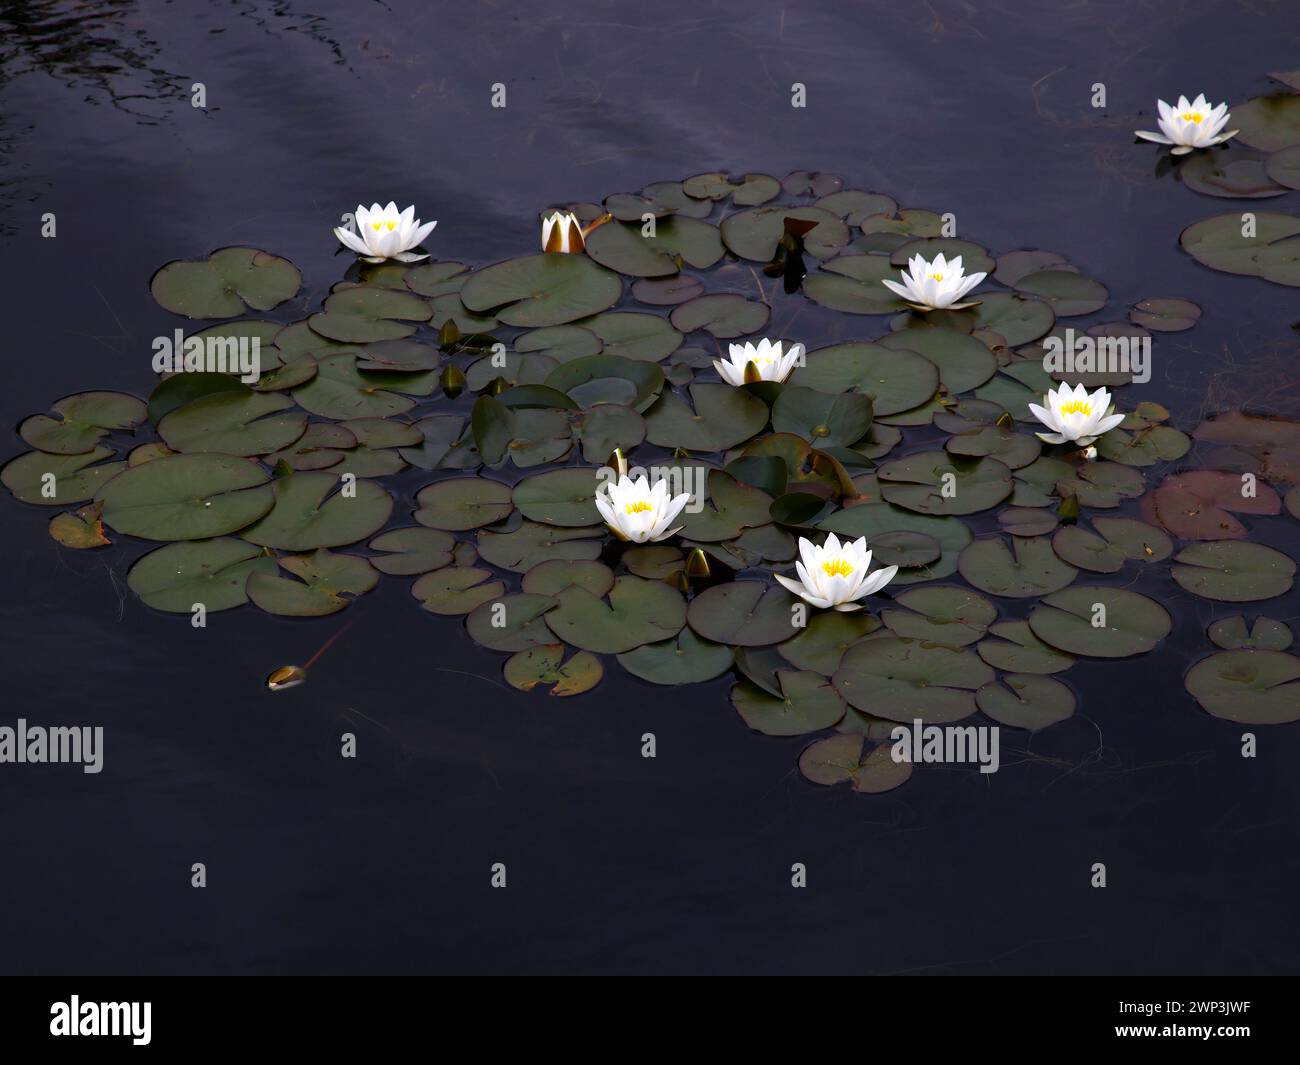 Closeup of the white flowers of the perennial aquatic garden waterlily plant nymphaea Hermine. Stock Photo